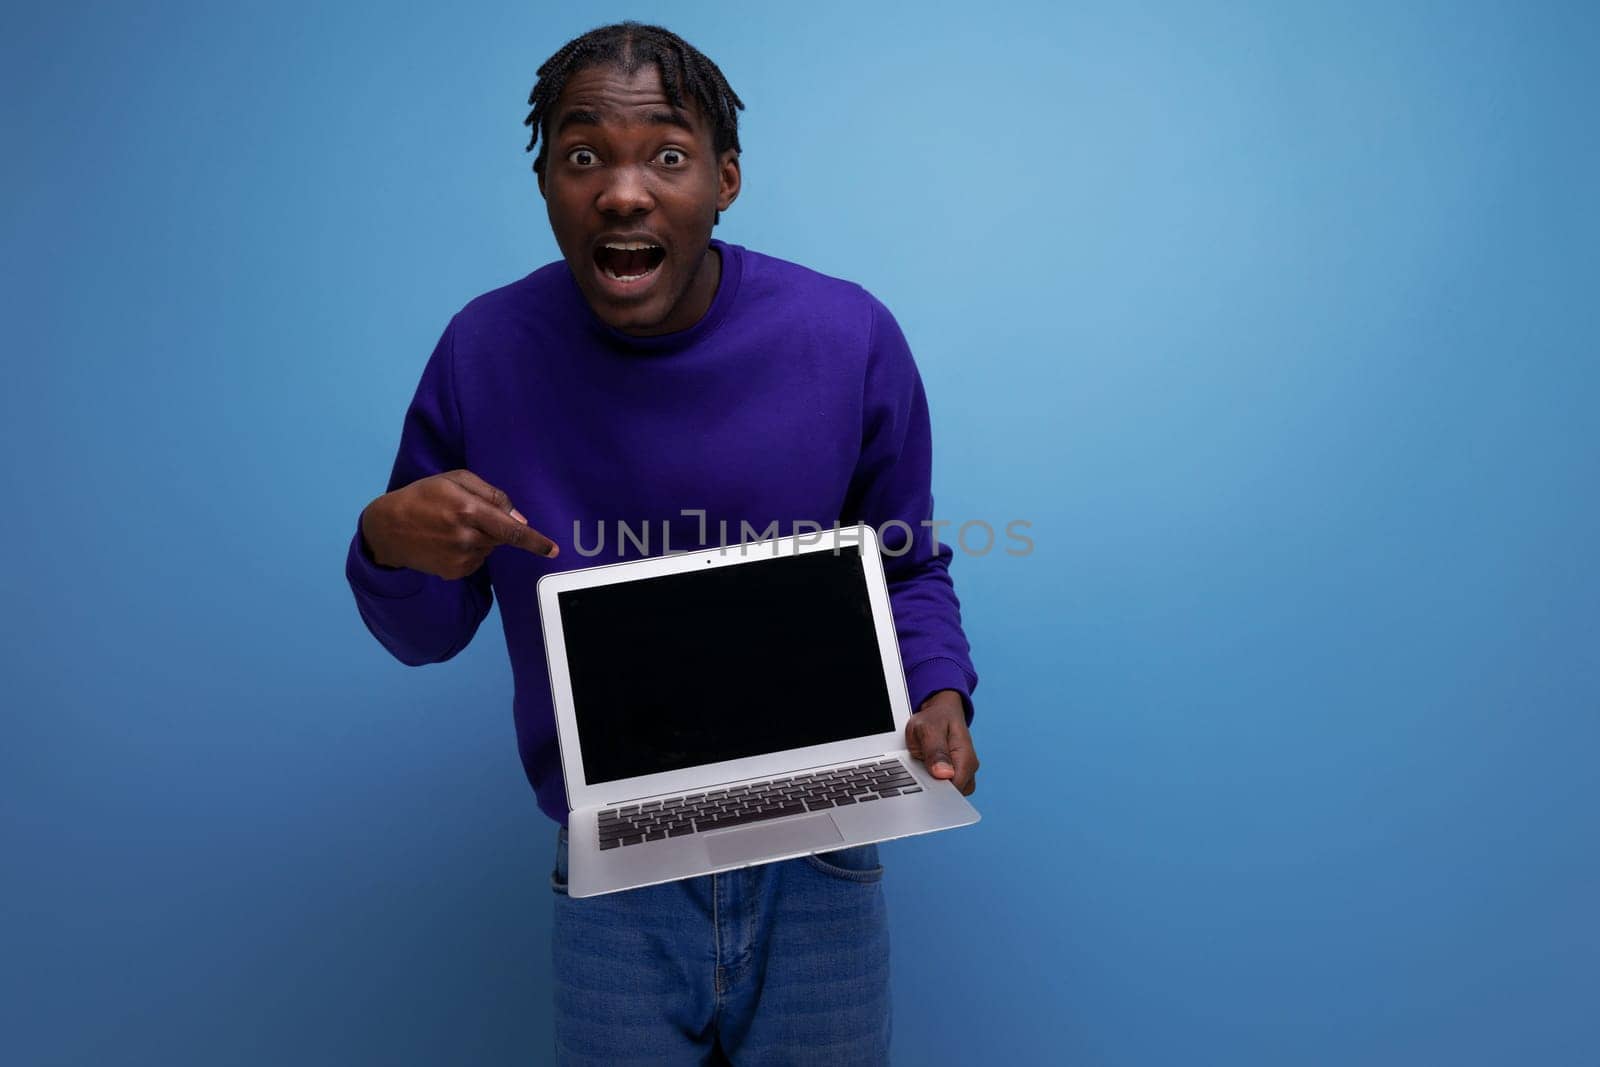 freelancer african young brunette man with dreadlocks with laptop.